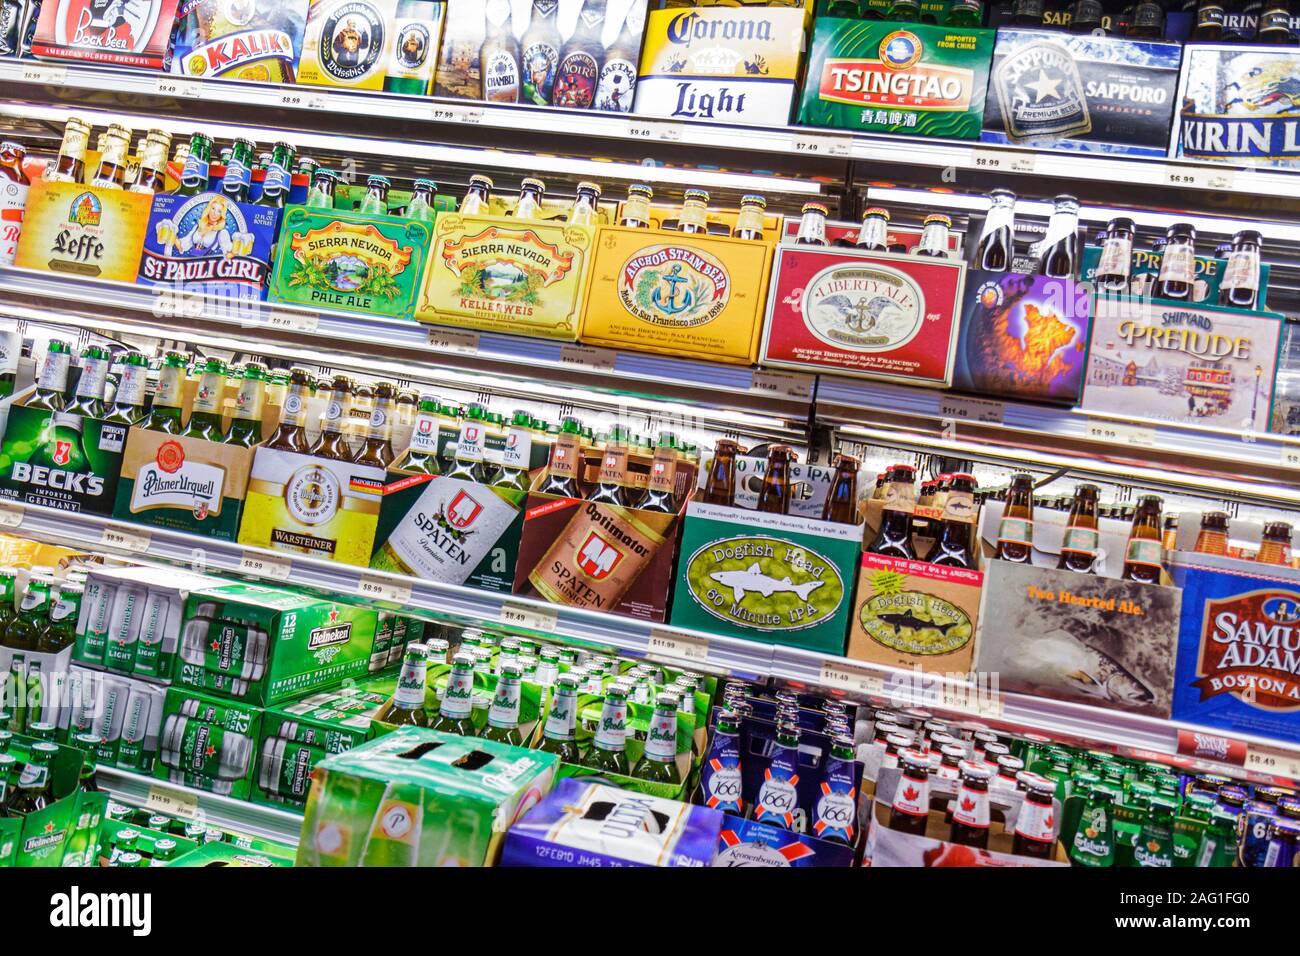 Miami Florida,Coconut Grove,The Fresh Market,grocery store,beverages,refrigerated,bottles,beer,brands shopping shopper shoppers shop shops market mark Stock Photo